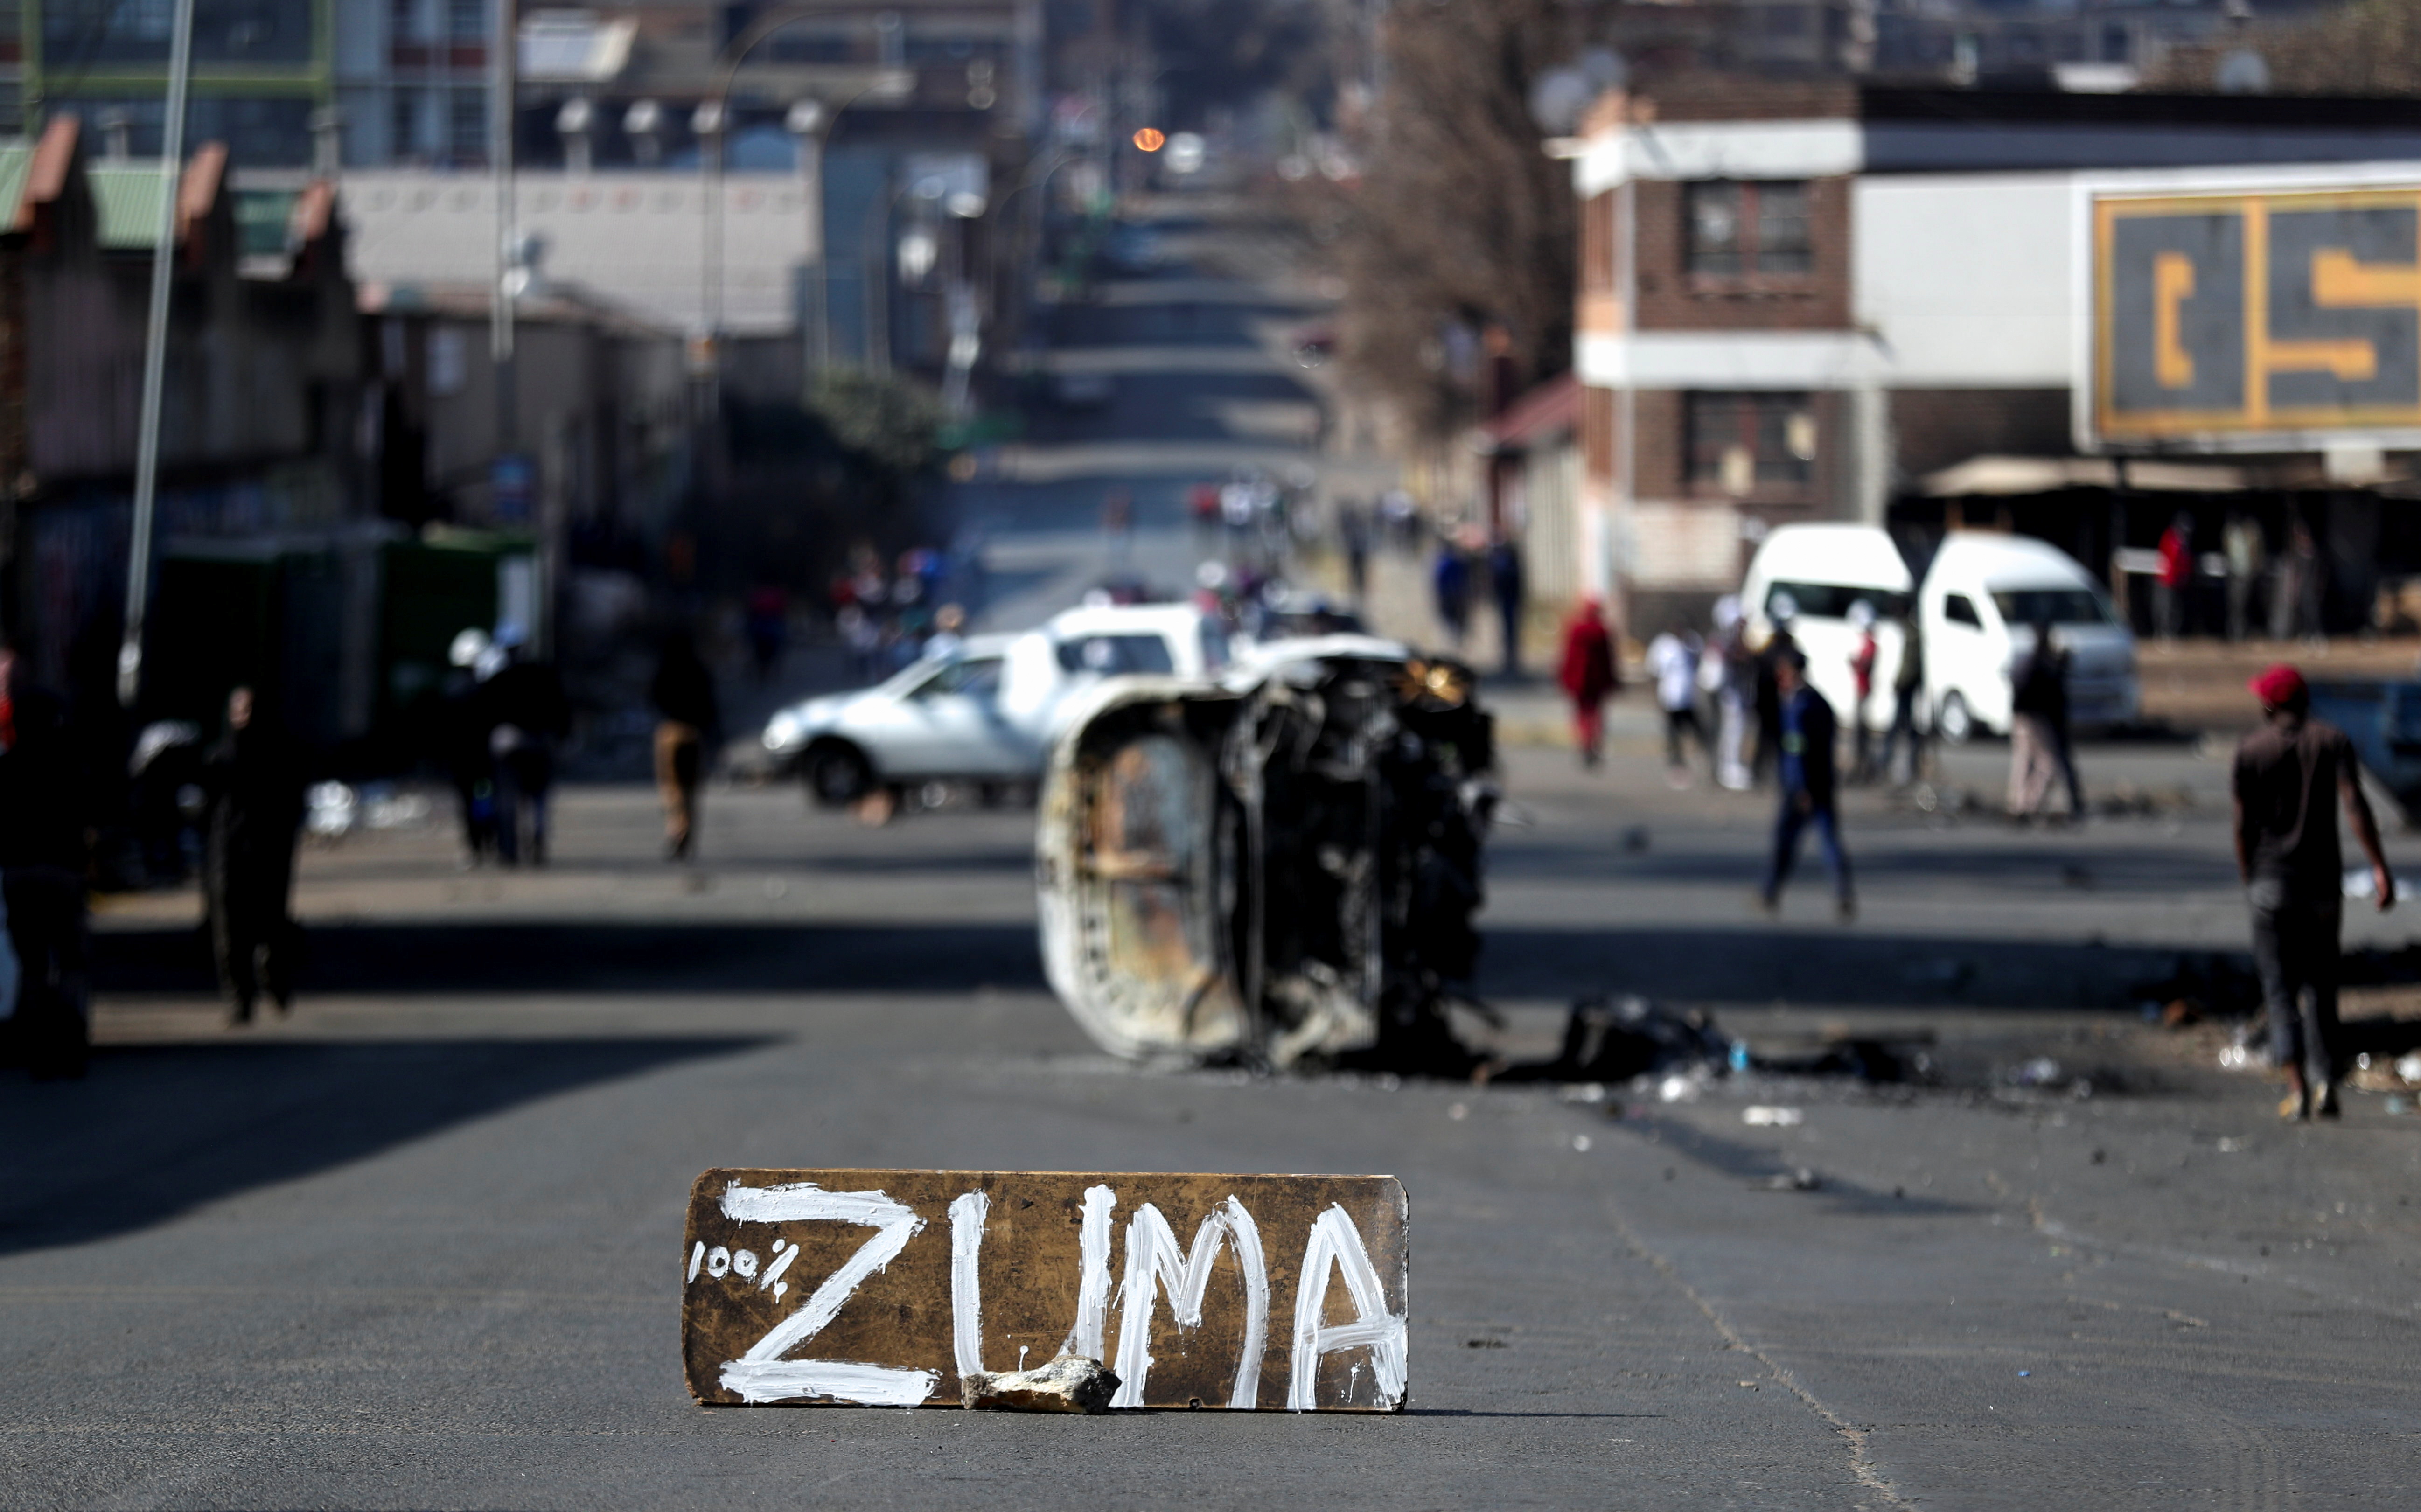 Violence spreads to South Africa's economic hub in wake of Zuma jailing